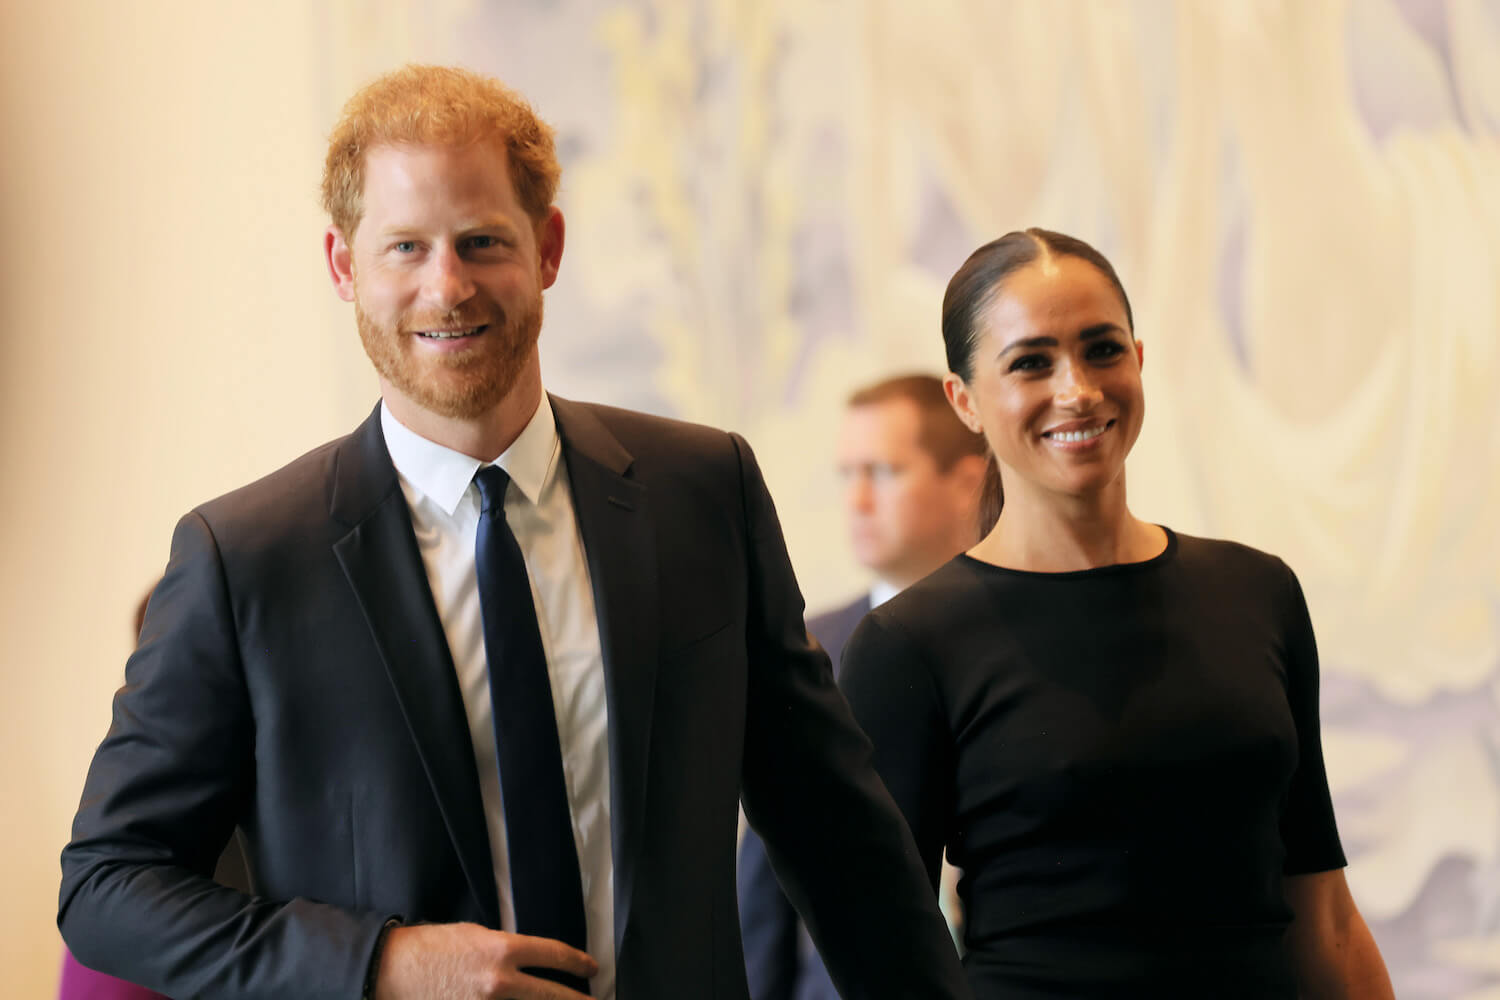 Prince Harry wears a suit and tie and smiles while walking with Meghan Markle who smiles wearing a black dress